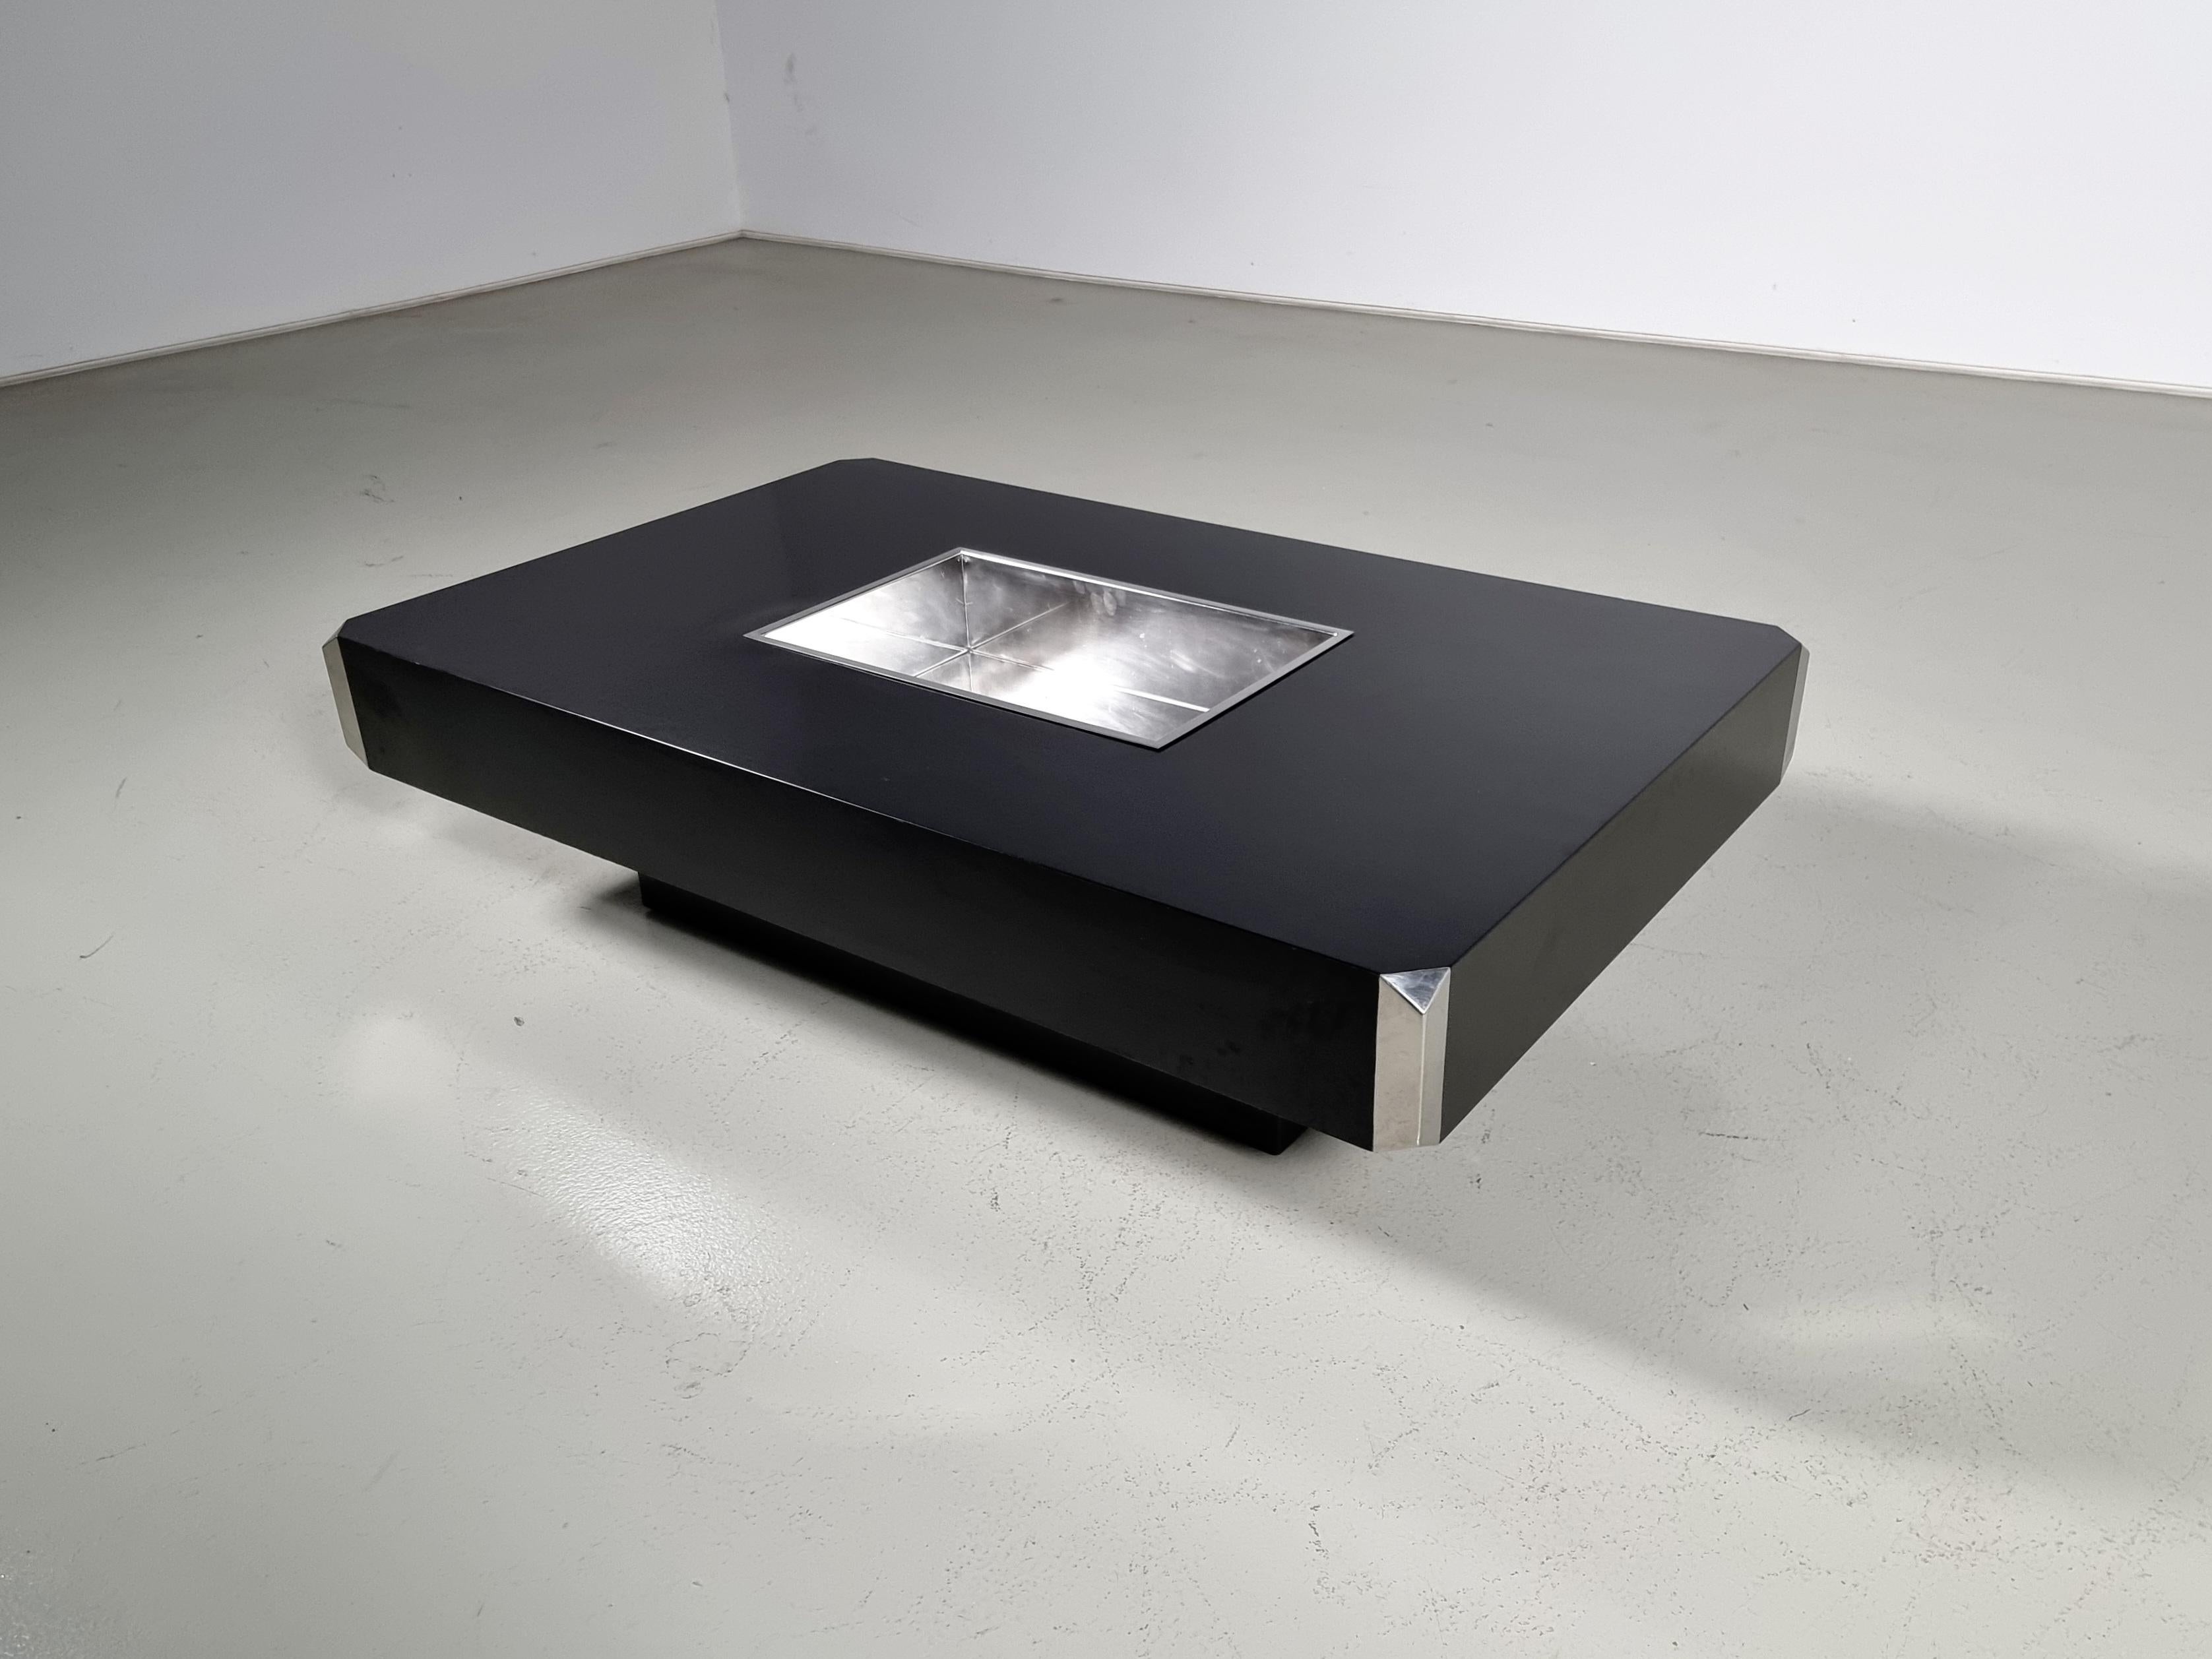 Coffee table Willy Rizzo for Mario Sabot from the 1970s

Made from gorgeous chrome with a black lacquered wood base.
The recessed base creates the impression that the table is floating and lightens the aesthetic.  One of the distinctive features of